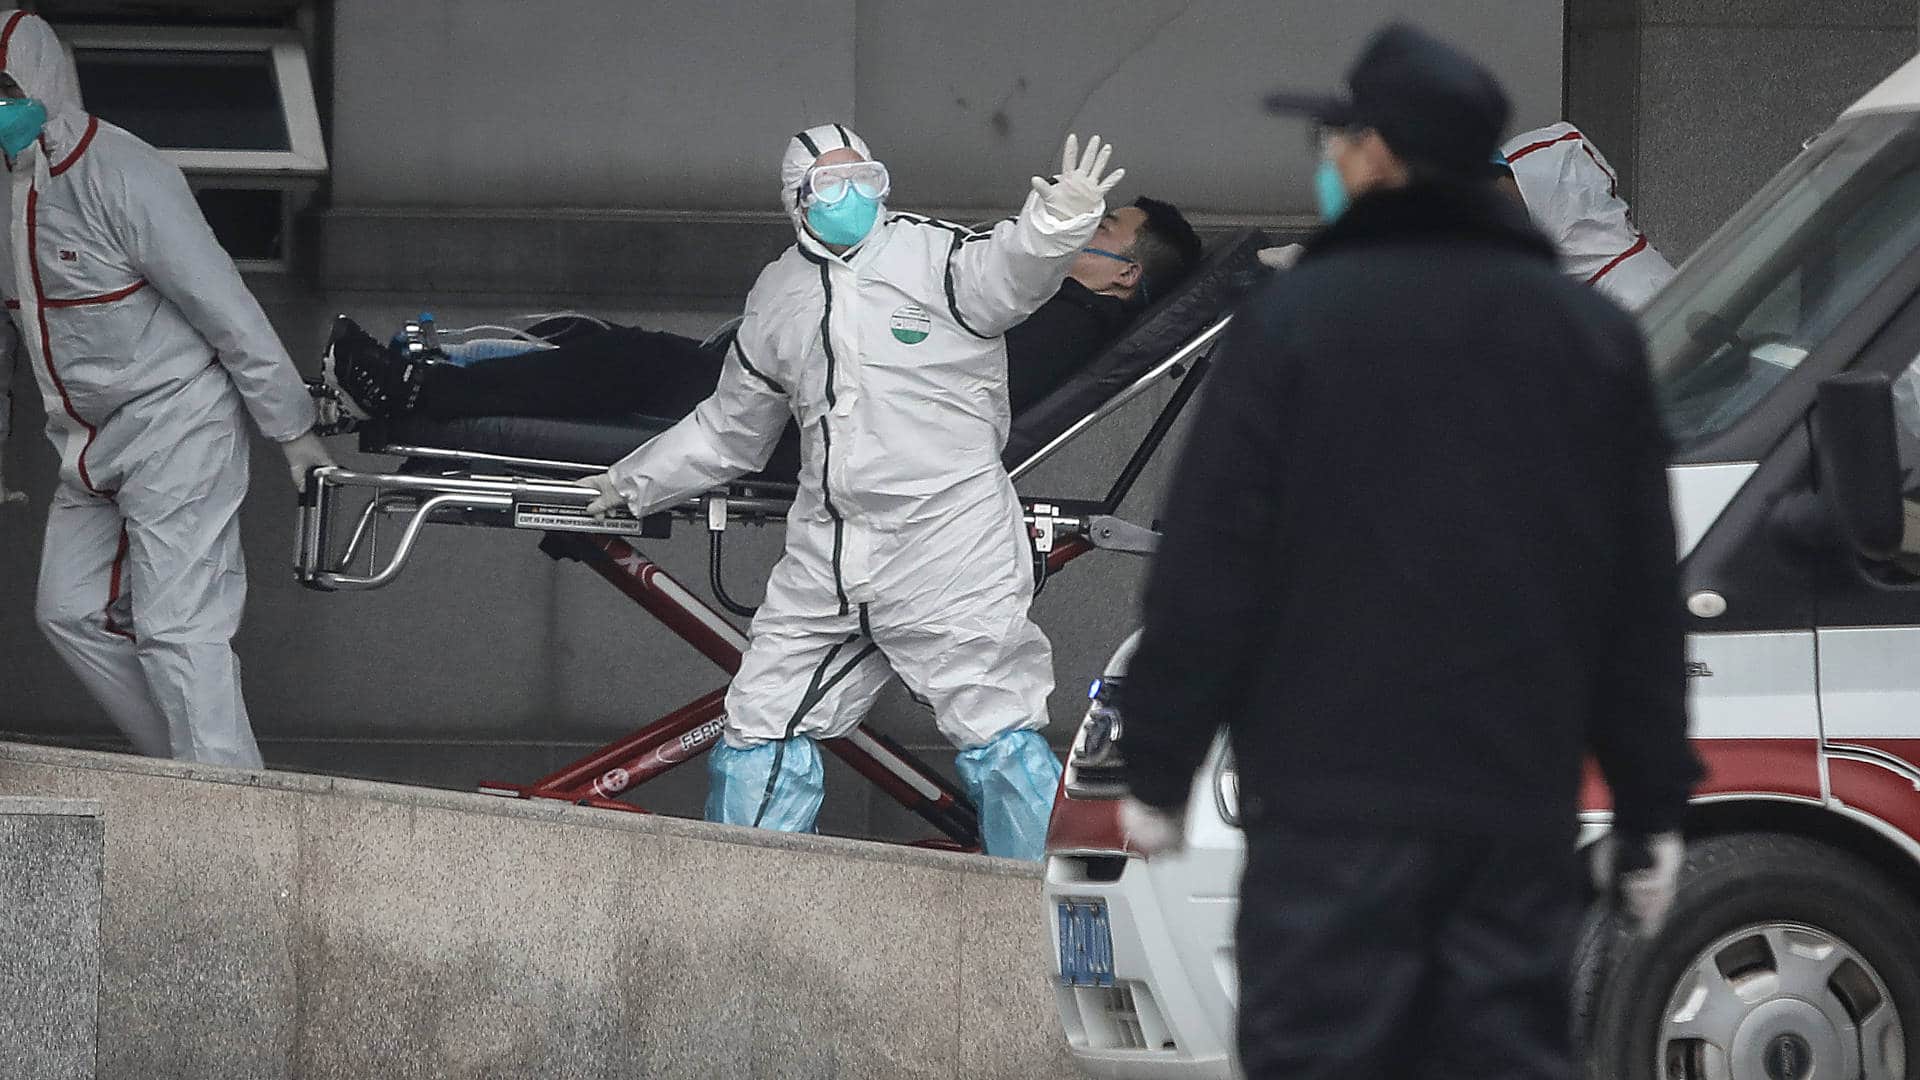 Medical staff transfer patients to Jin Yintan hospital on January 17, 2020 in Wuhan, Hubei, China. At that time, local authorities had confirmed that a second person in the city had died of a pneumonia-like virus.